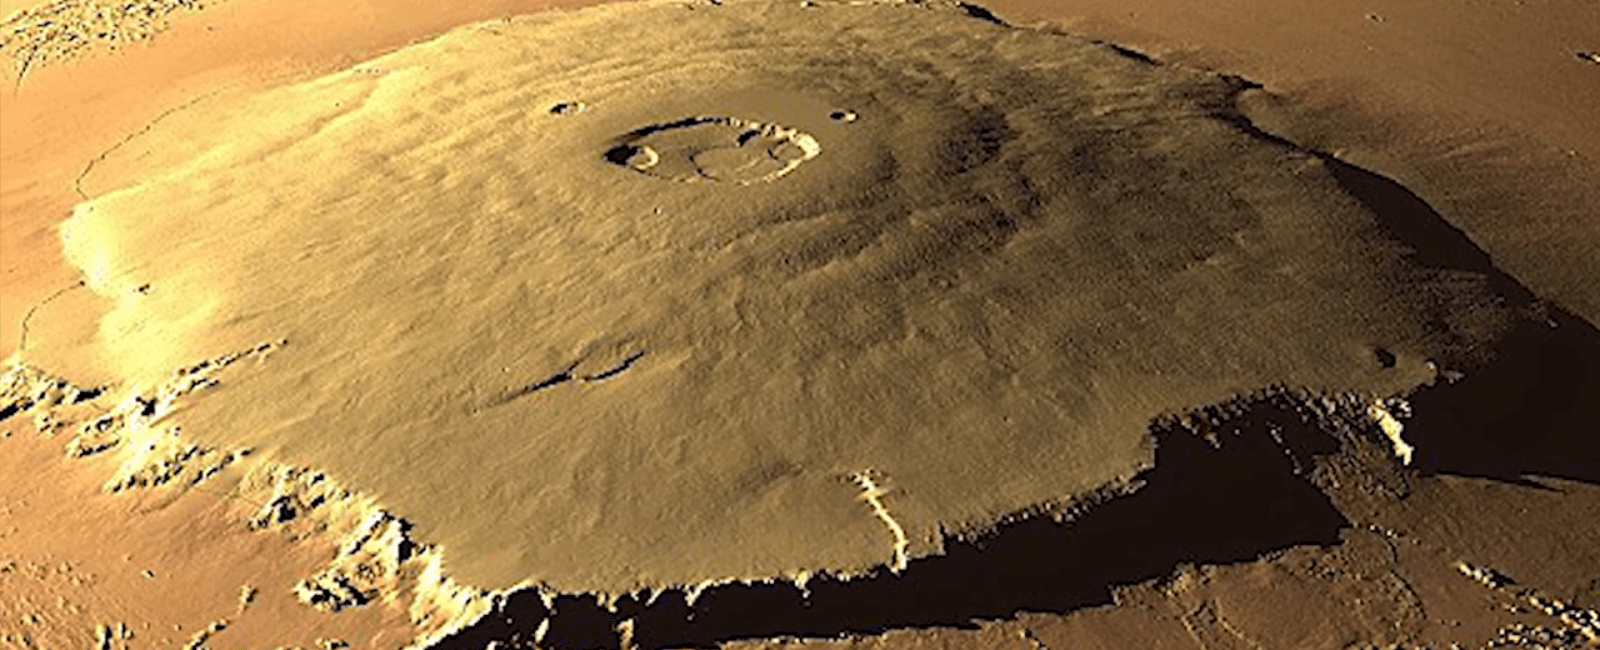 Mount olympus mons on mars is three times the size of mount everest